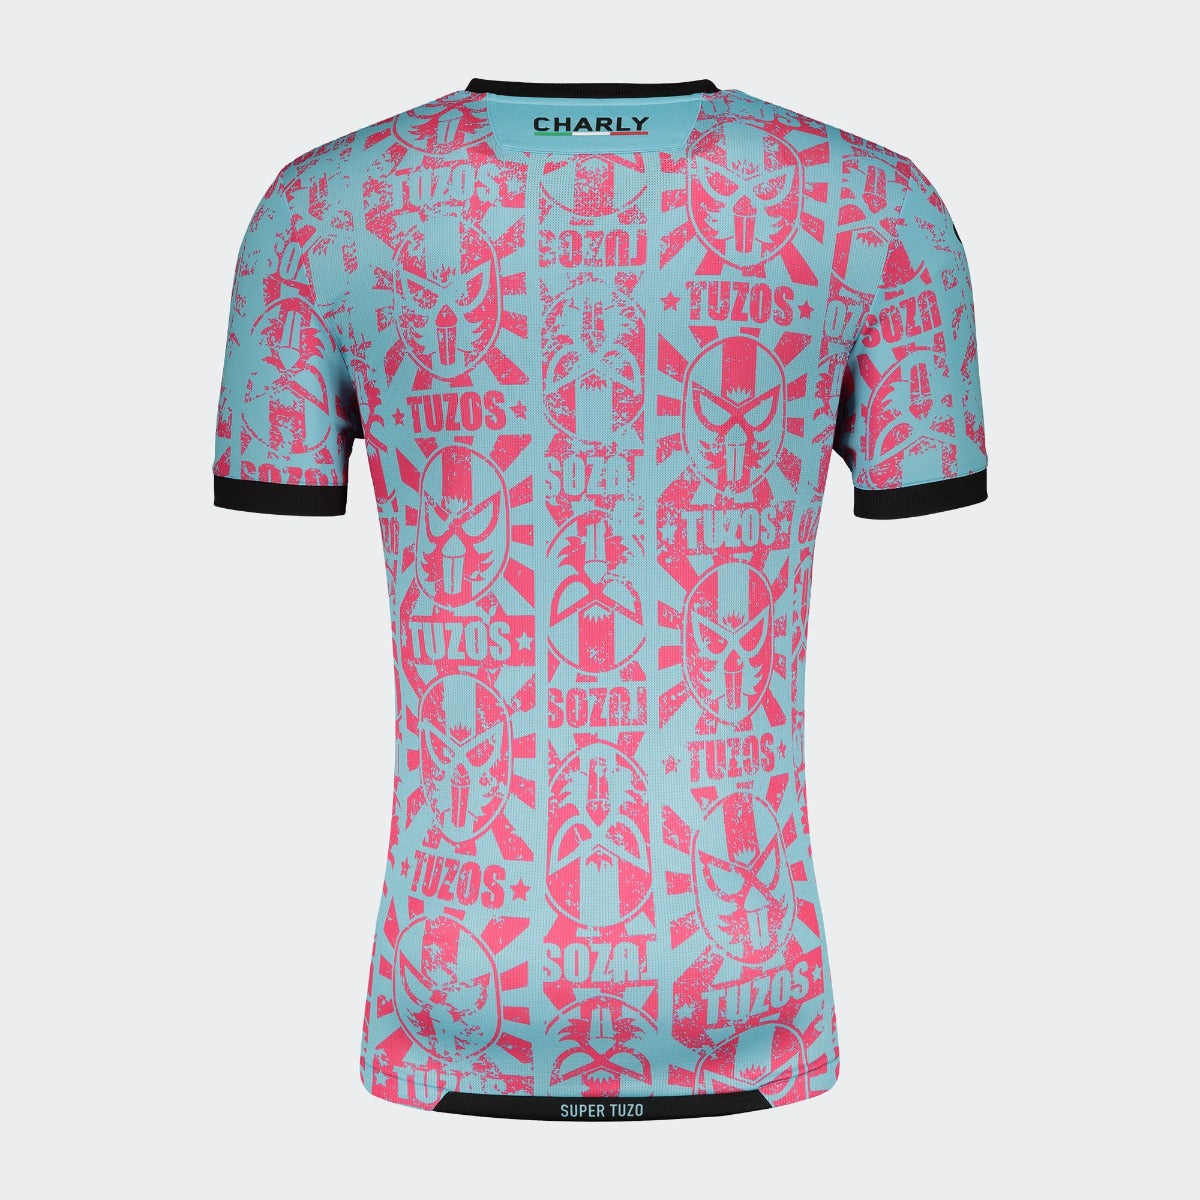 Charly 2021-22 Pachuca Third Jersey - Light Blue-Pink (Back)